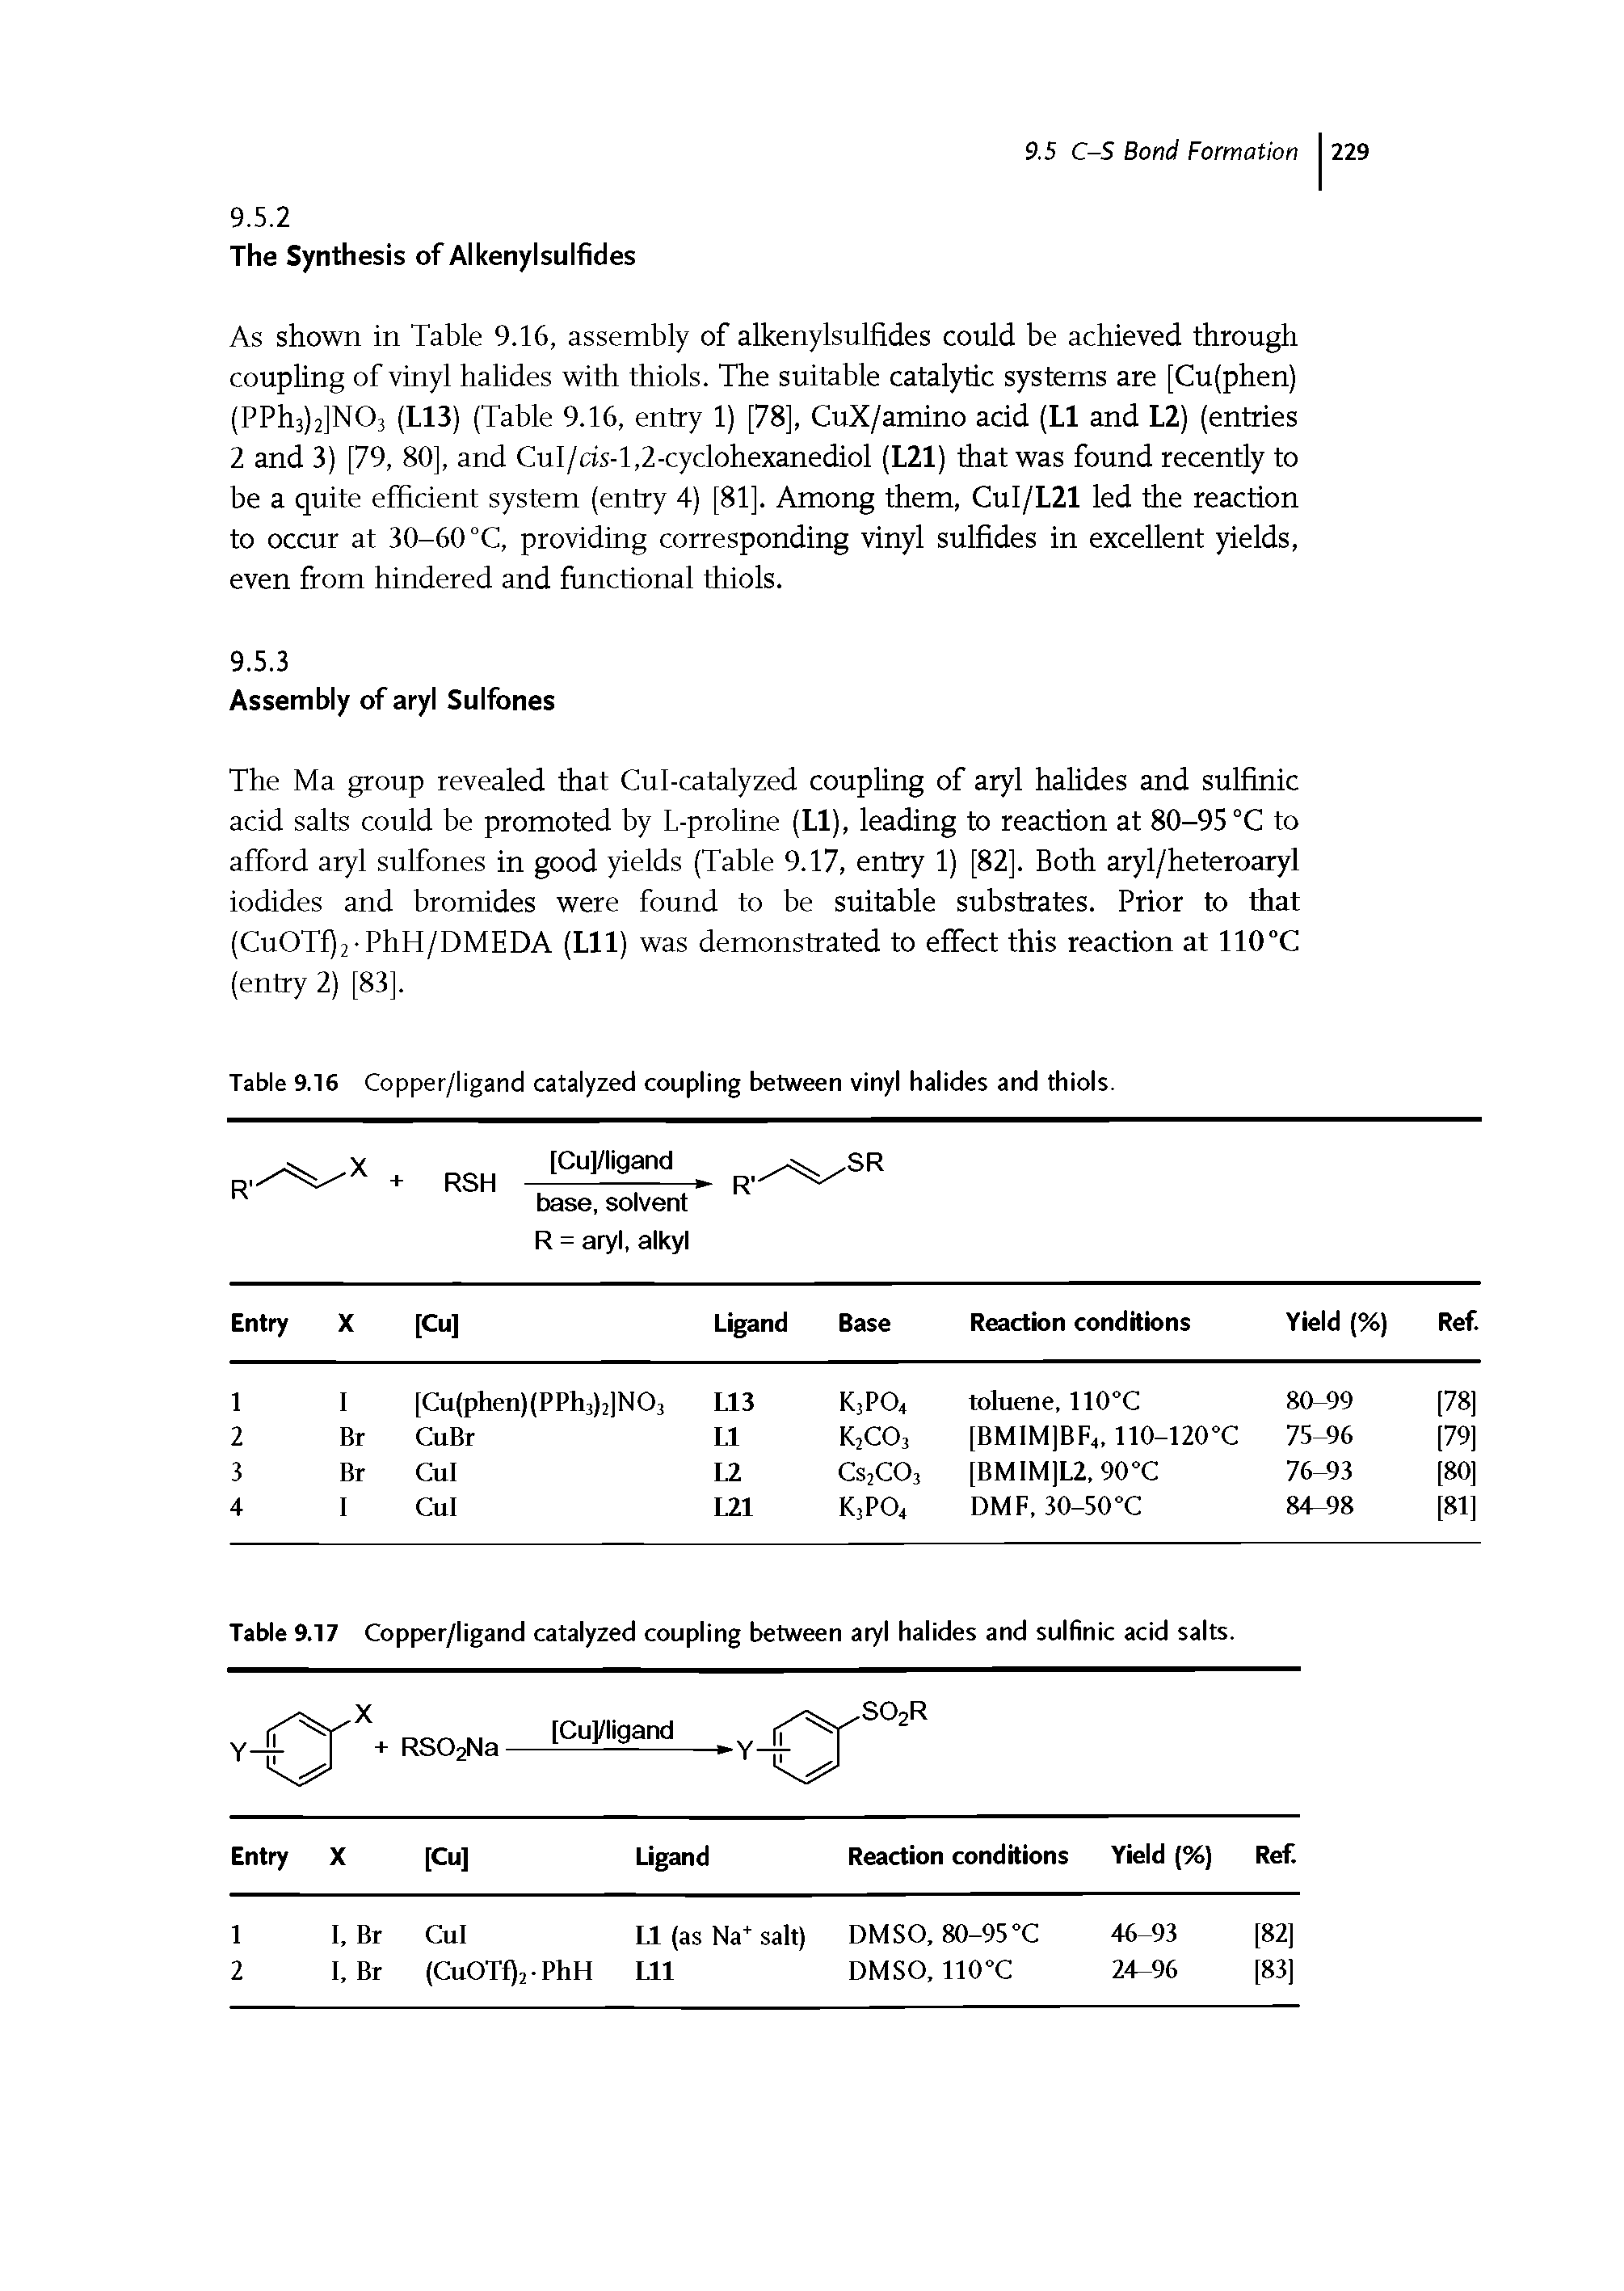 Table 9.17 Copper/ligand catalyzed coupling between aryl halides and sulfinic acid salts.